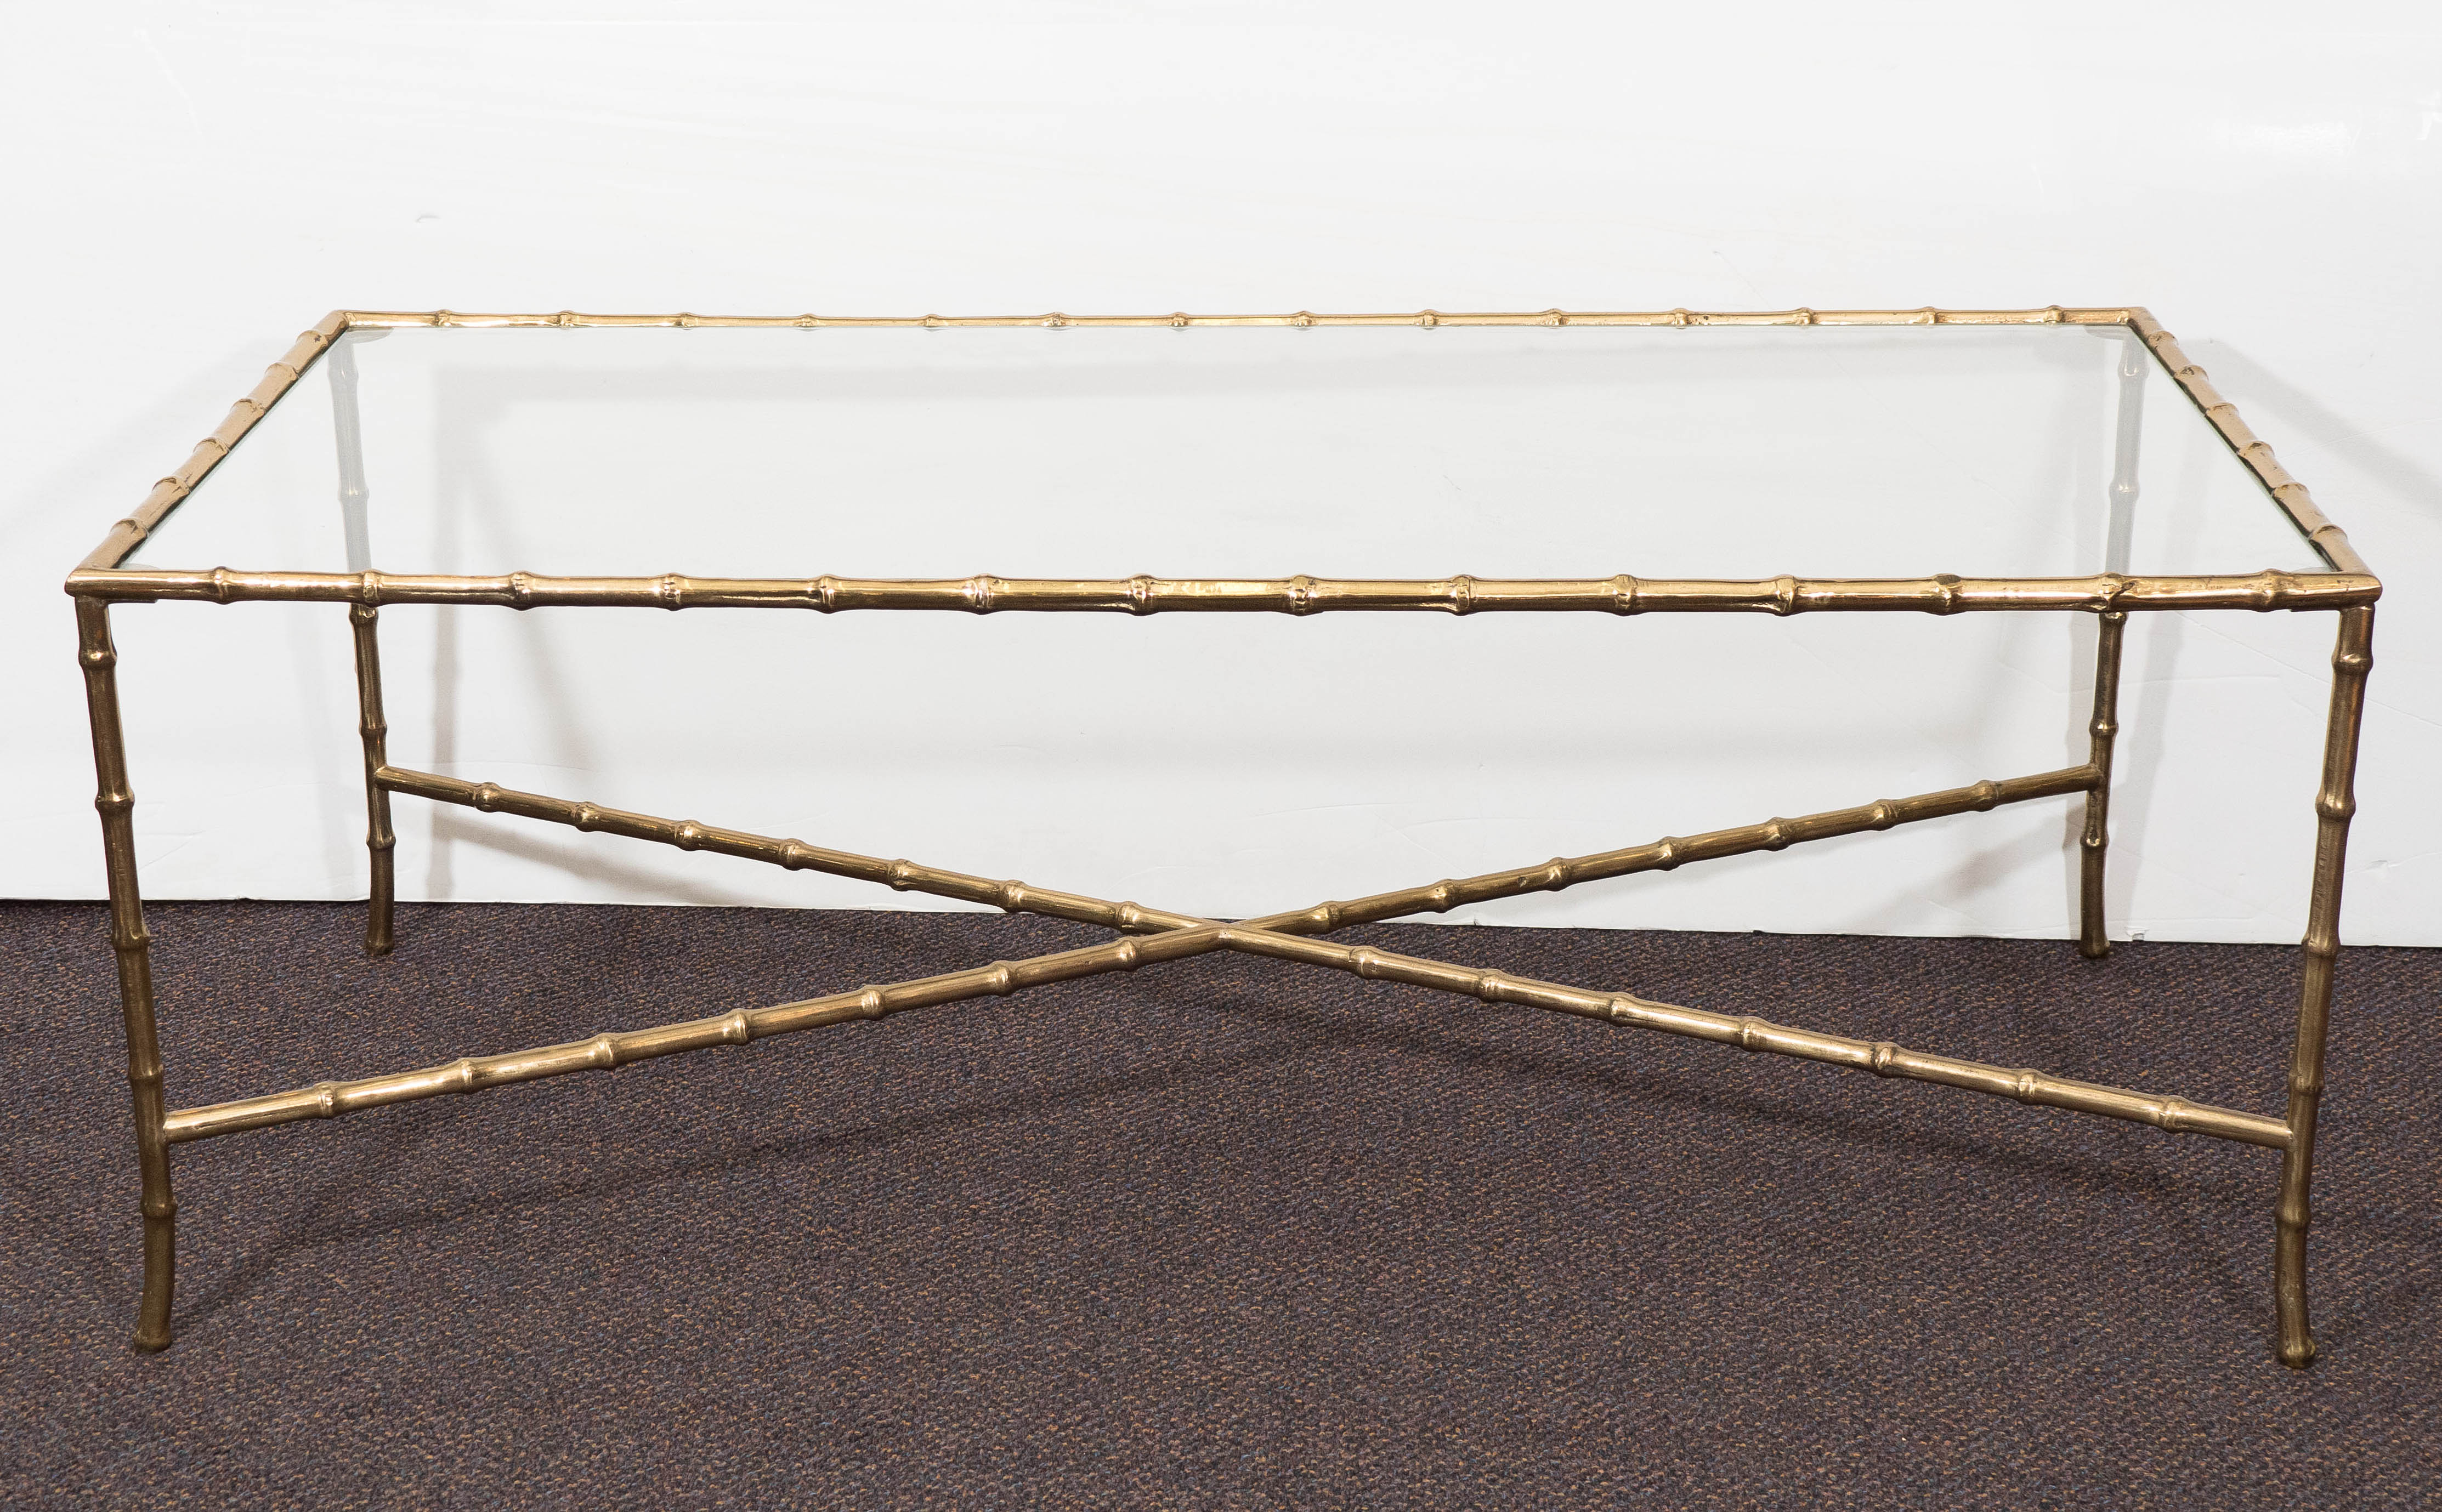 A vintage brass coffee table in the chinoiserie mode, produced circa 1960's by French designer Maison Baques, with glass top over faux bamboo frame and cross beam stretcher. Very good vintage condition, with minimal wear.